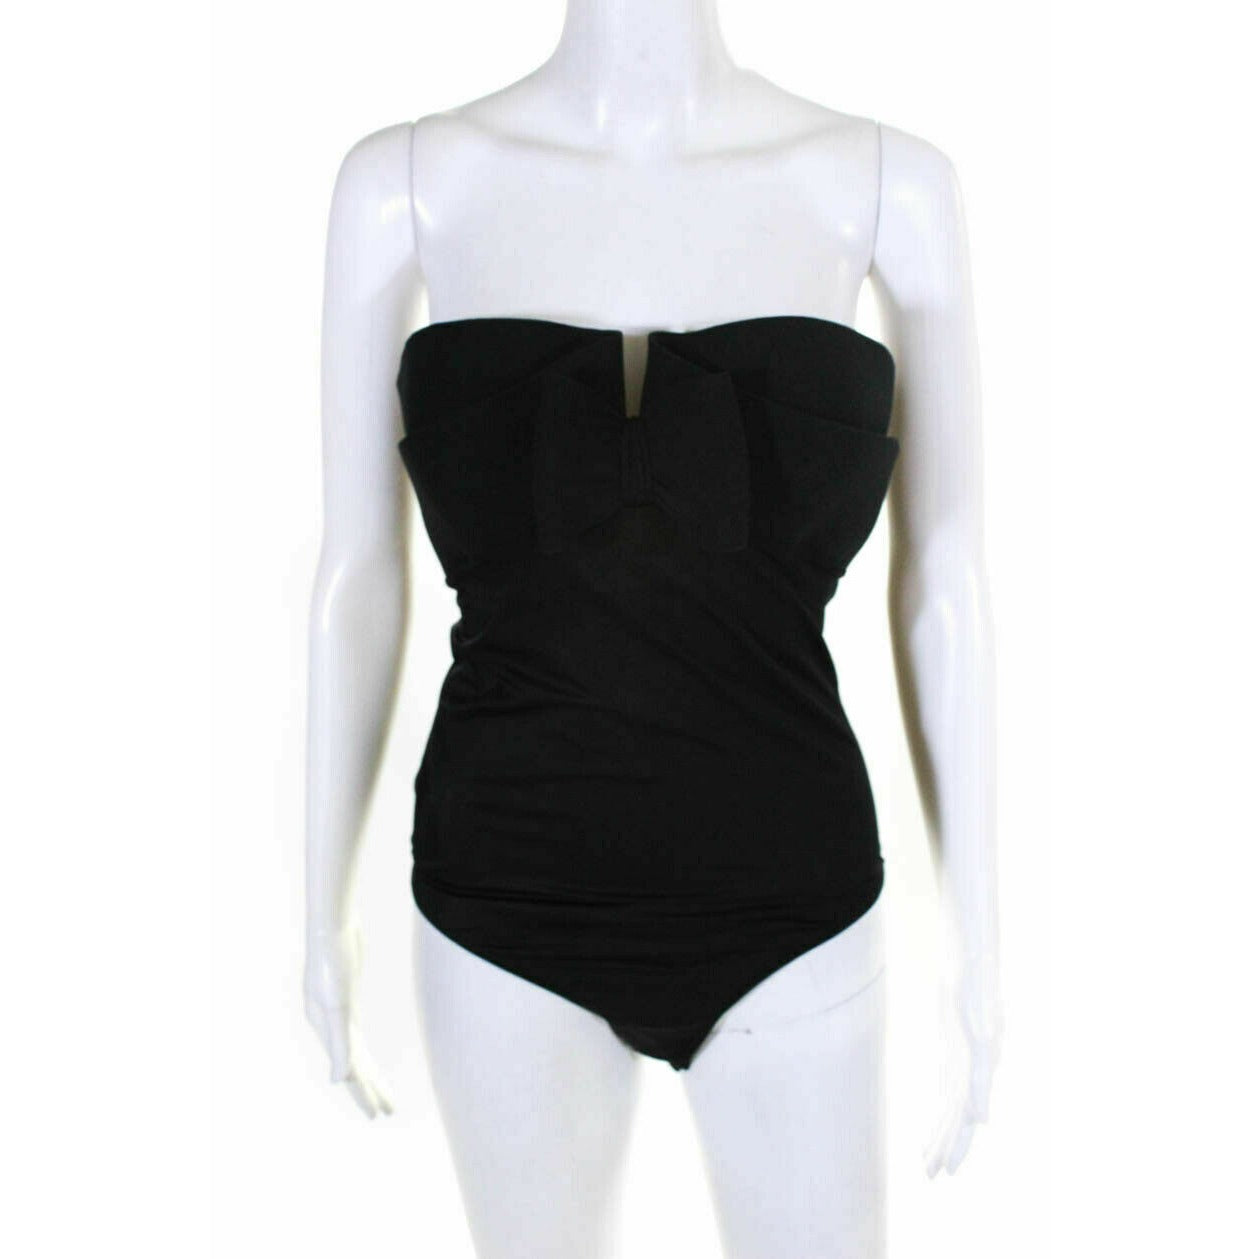 Wolford Giorgio Armani Strapless Body Suit Black Size Medium B Cup 718 –  Luxury Priced Right